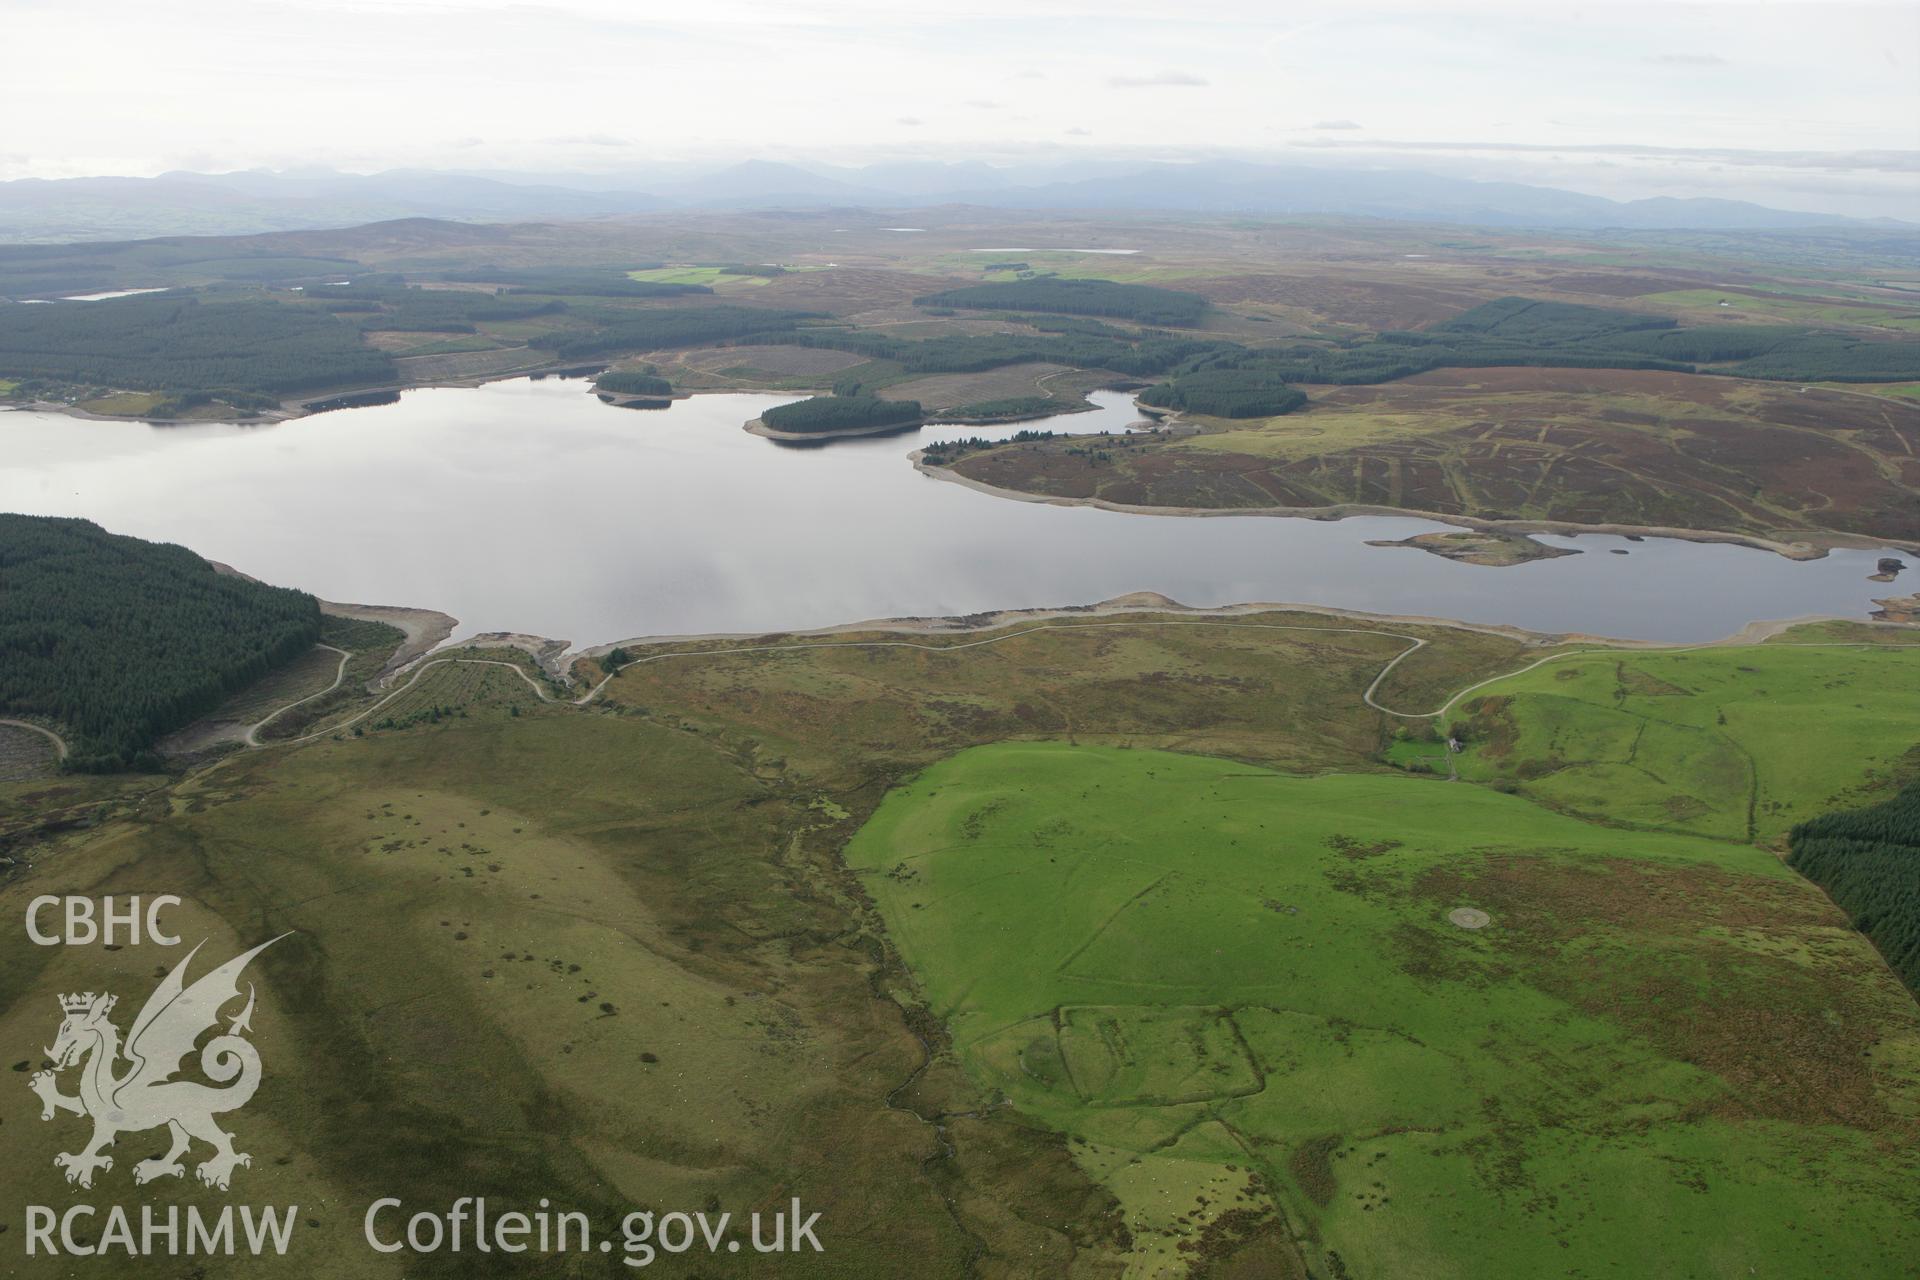 RCAHMW colour oblique aerial photograph of Hen Ddinbych showing landscape looking west towards Llyn Brenig Taken on 13 October 2009 by Toby Driver